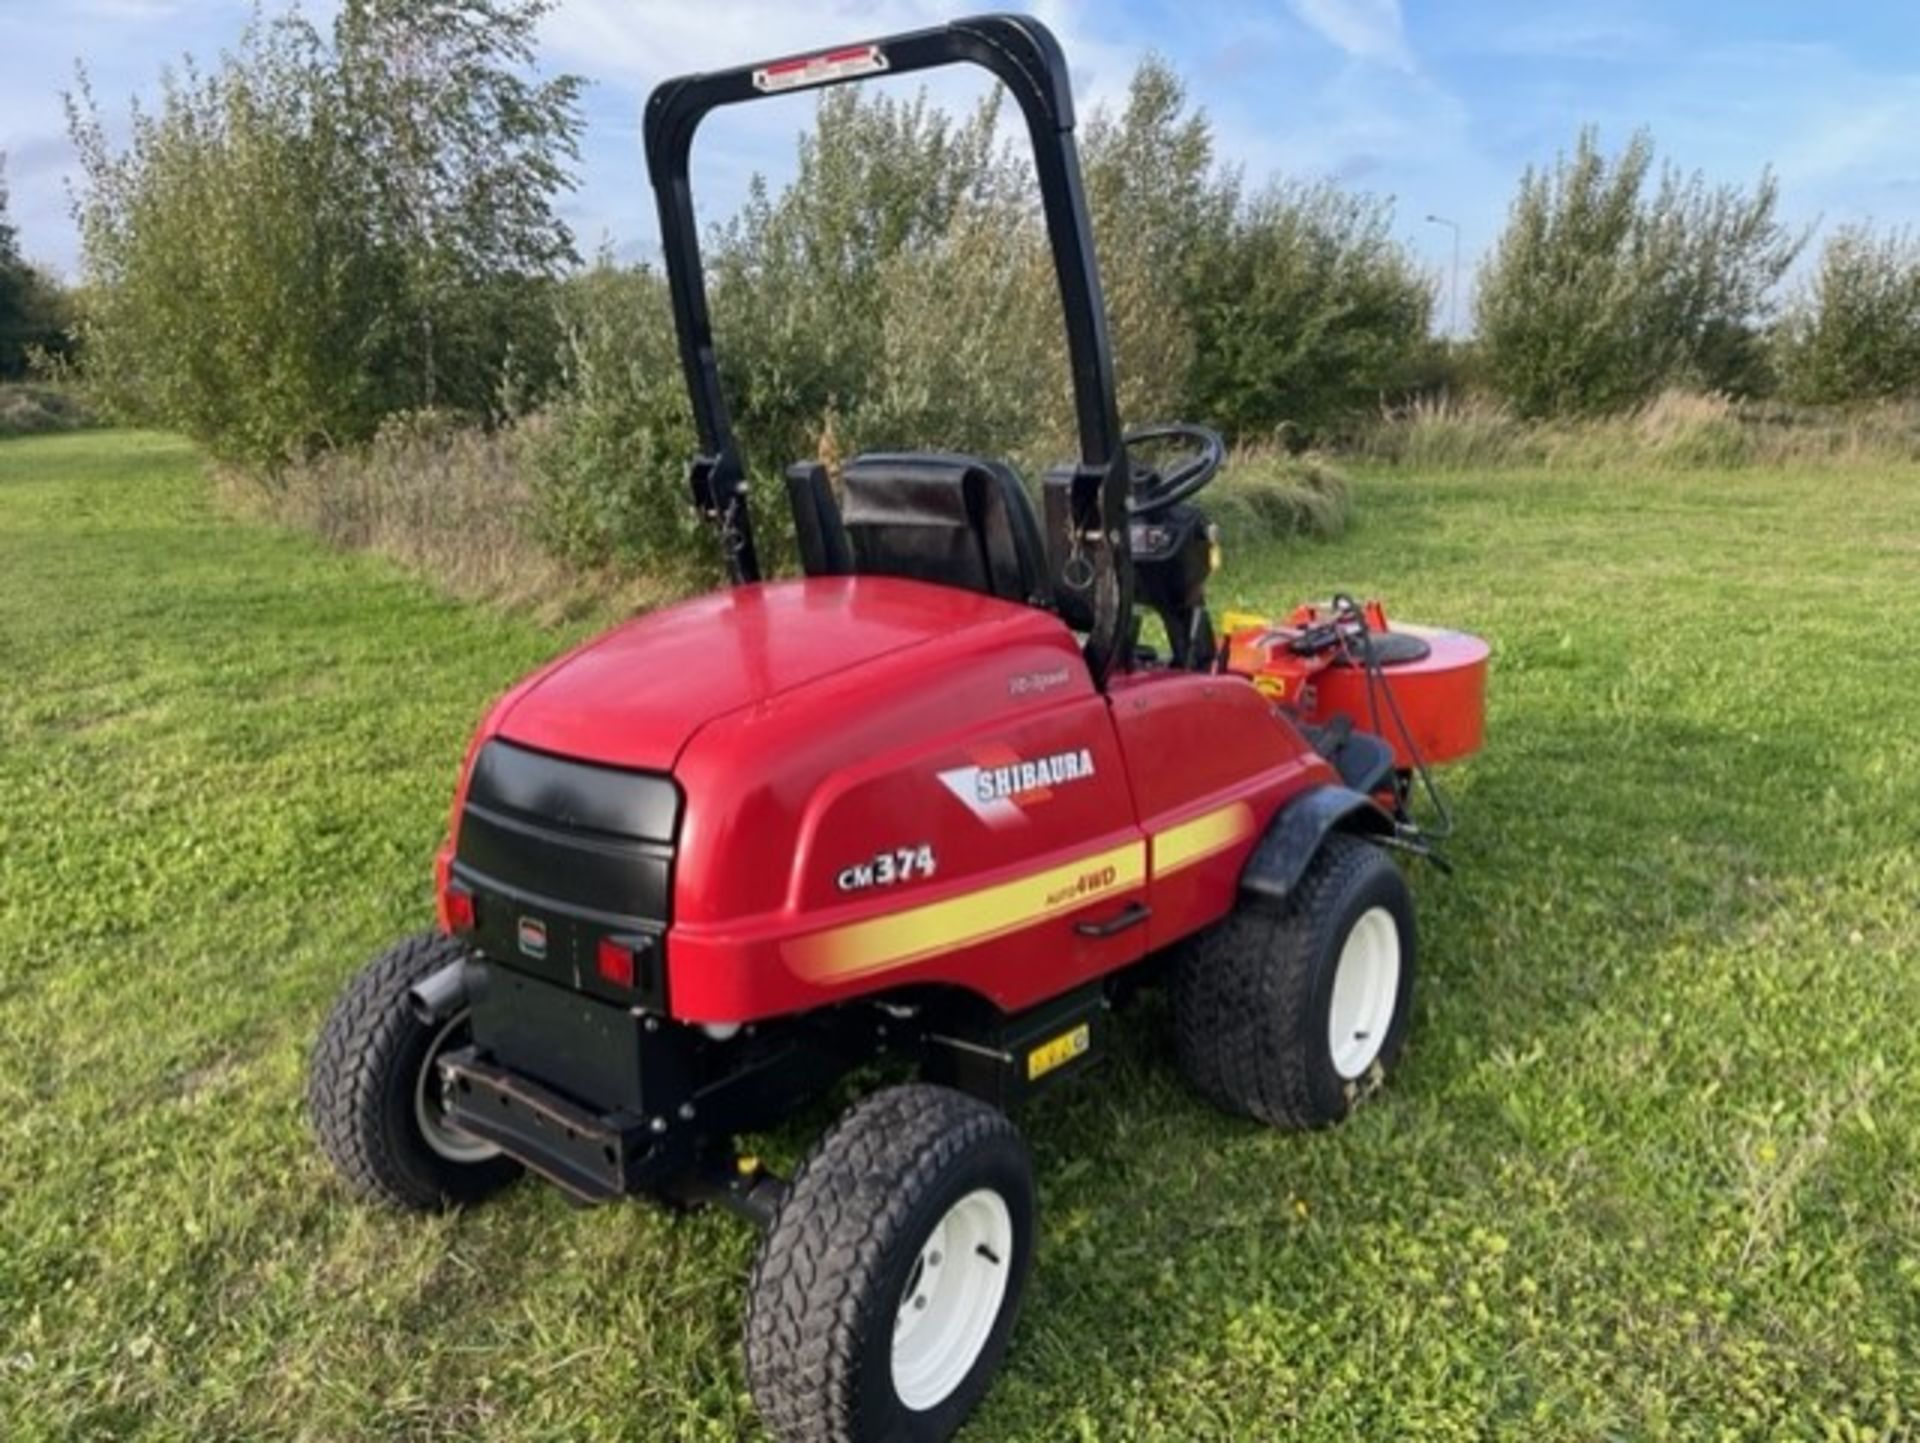 2018, SHIBAURA CM374 OUTFRONT MOWER WITH DECK & BLOWER - Image 3 of 13